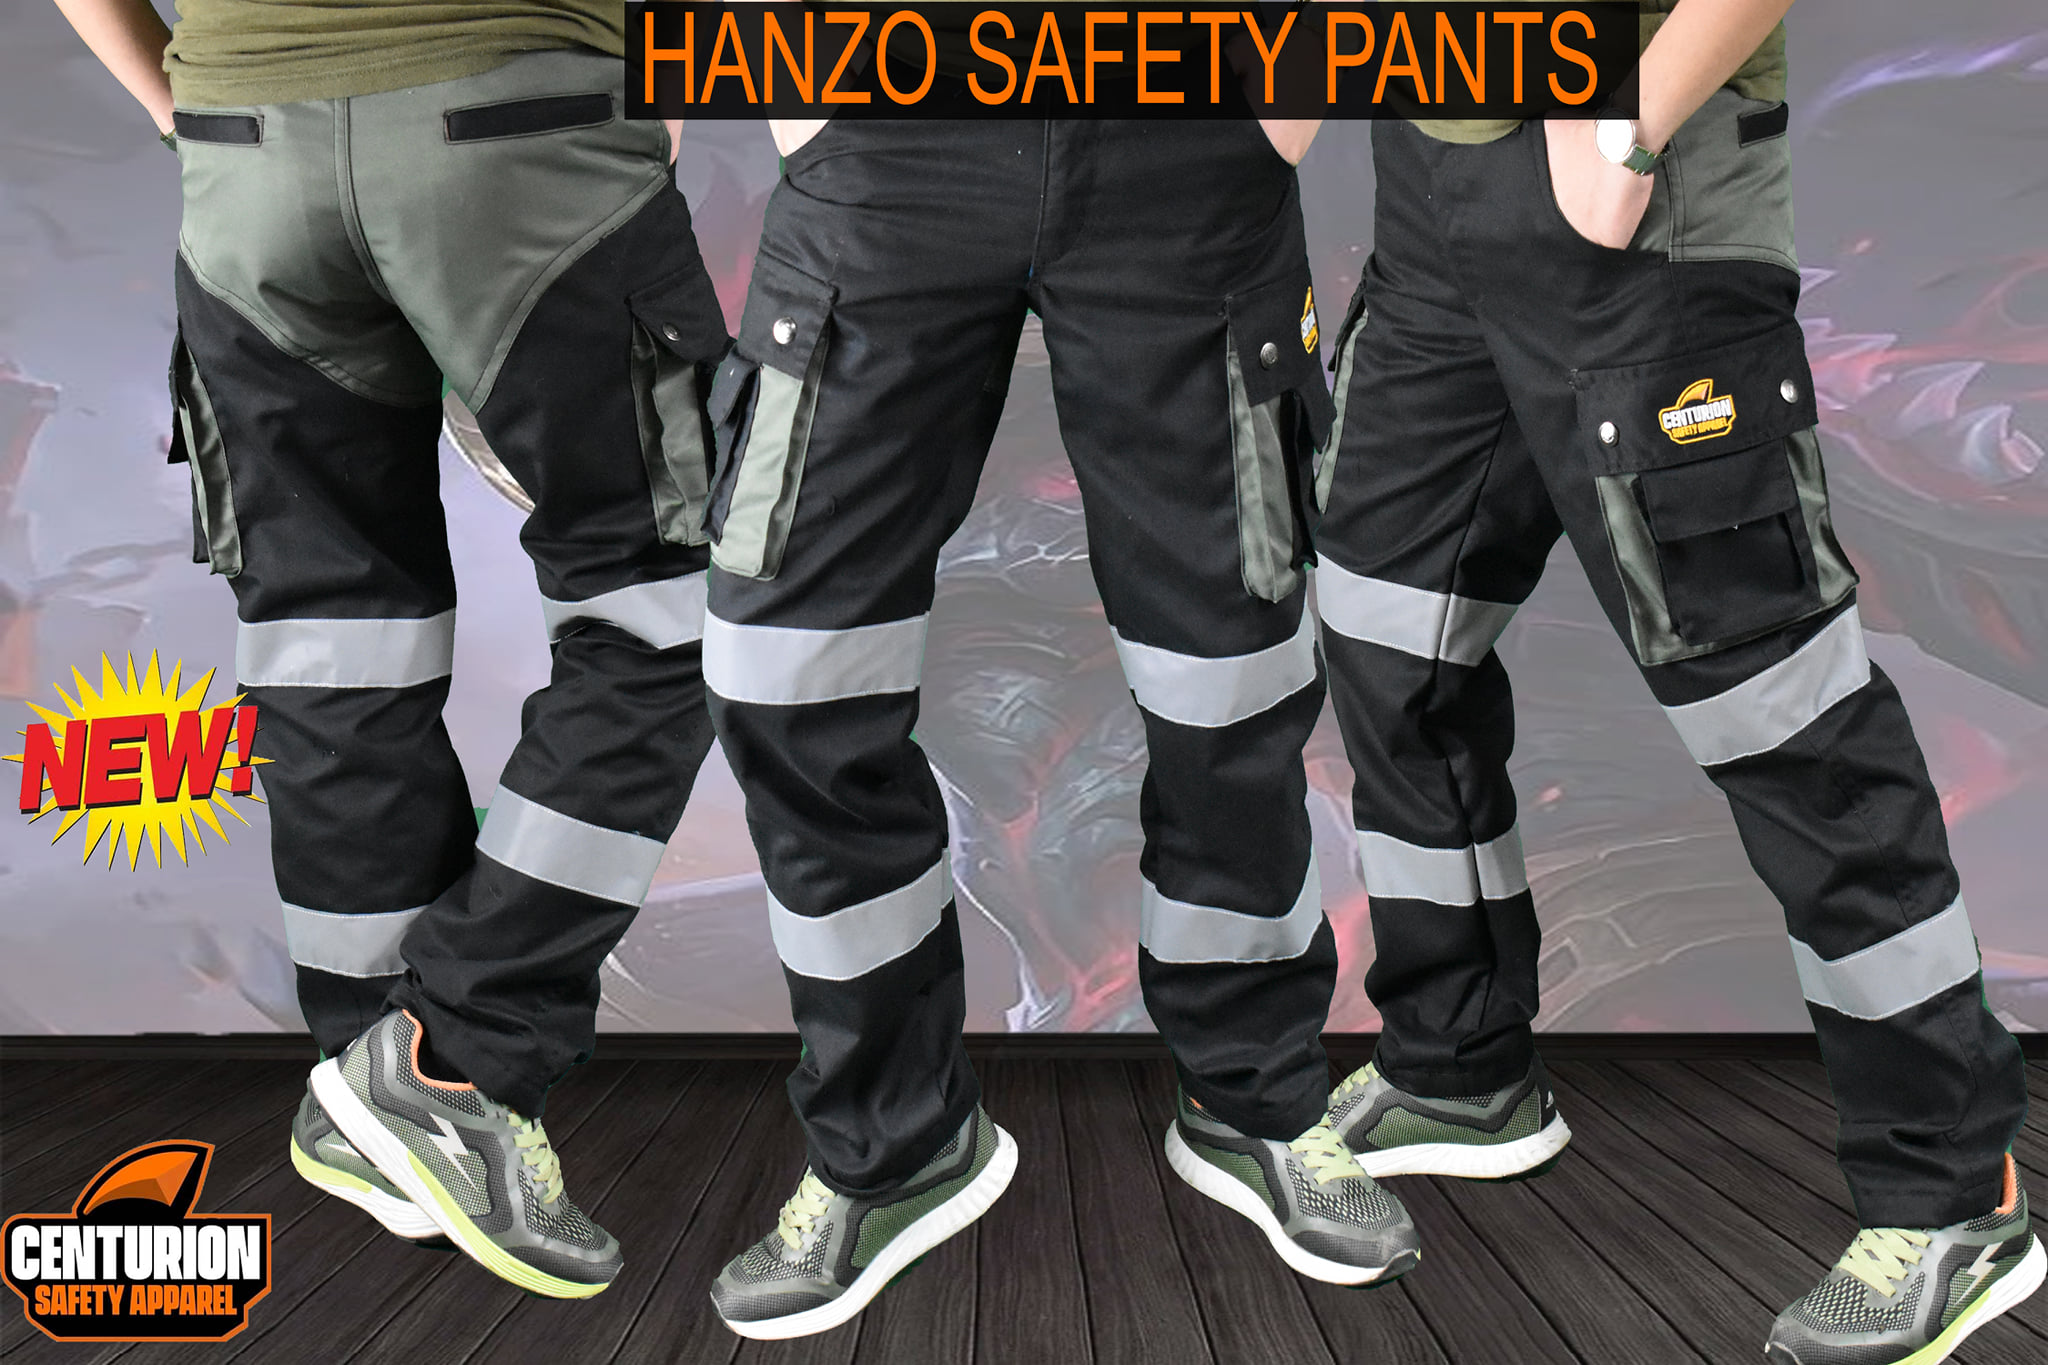 HANZO, 8 pocket tactical rider reflectorized safety pants – Cutton